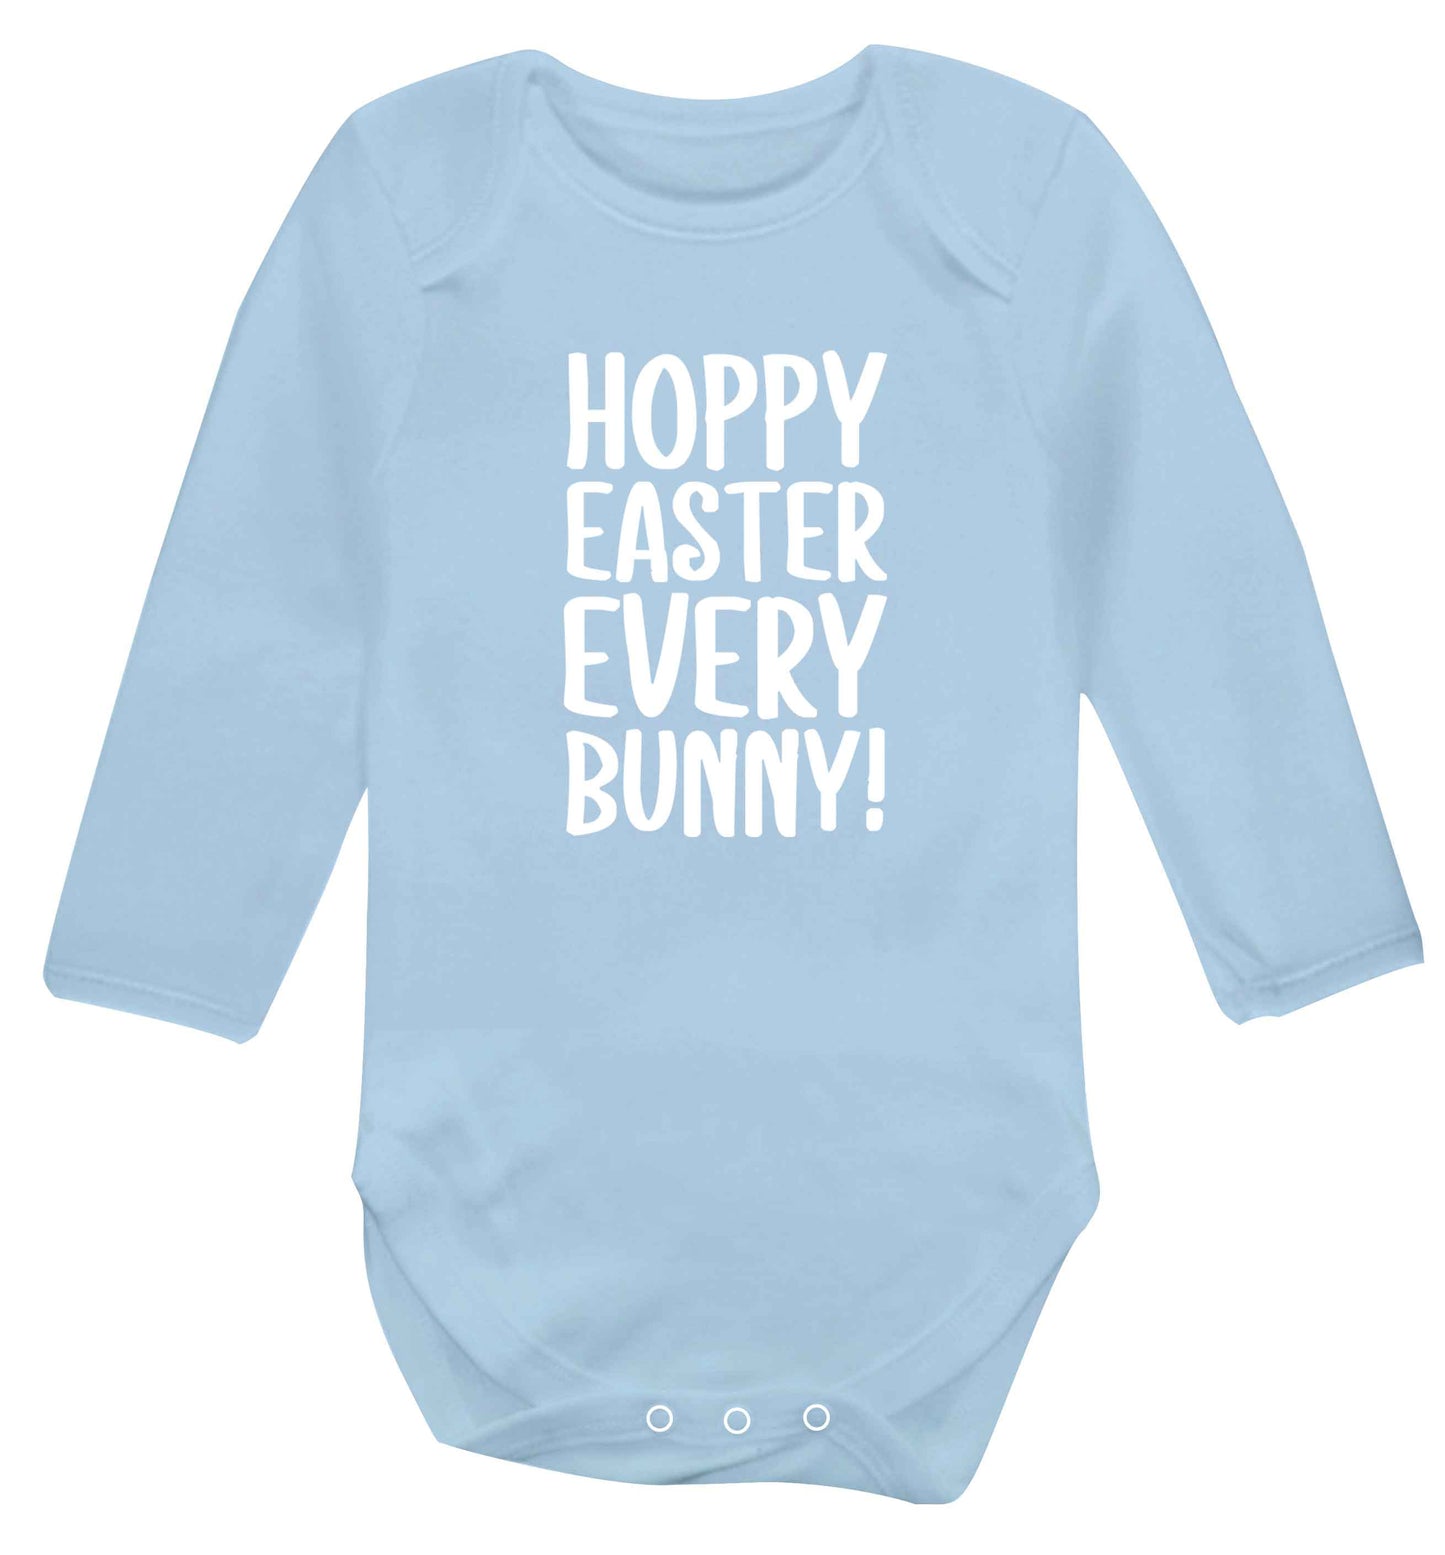 Hoppy Easter every bunny! baby vest long sleeved pale blue 6-12 months